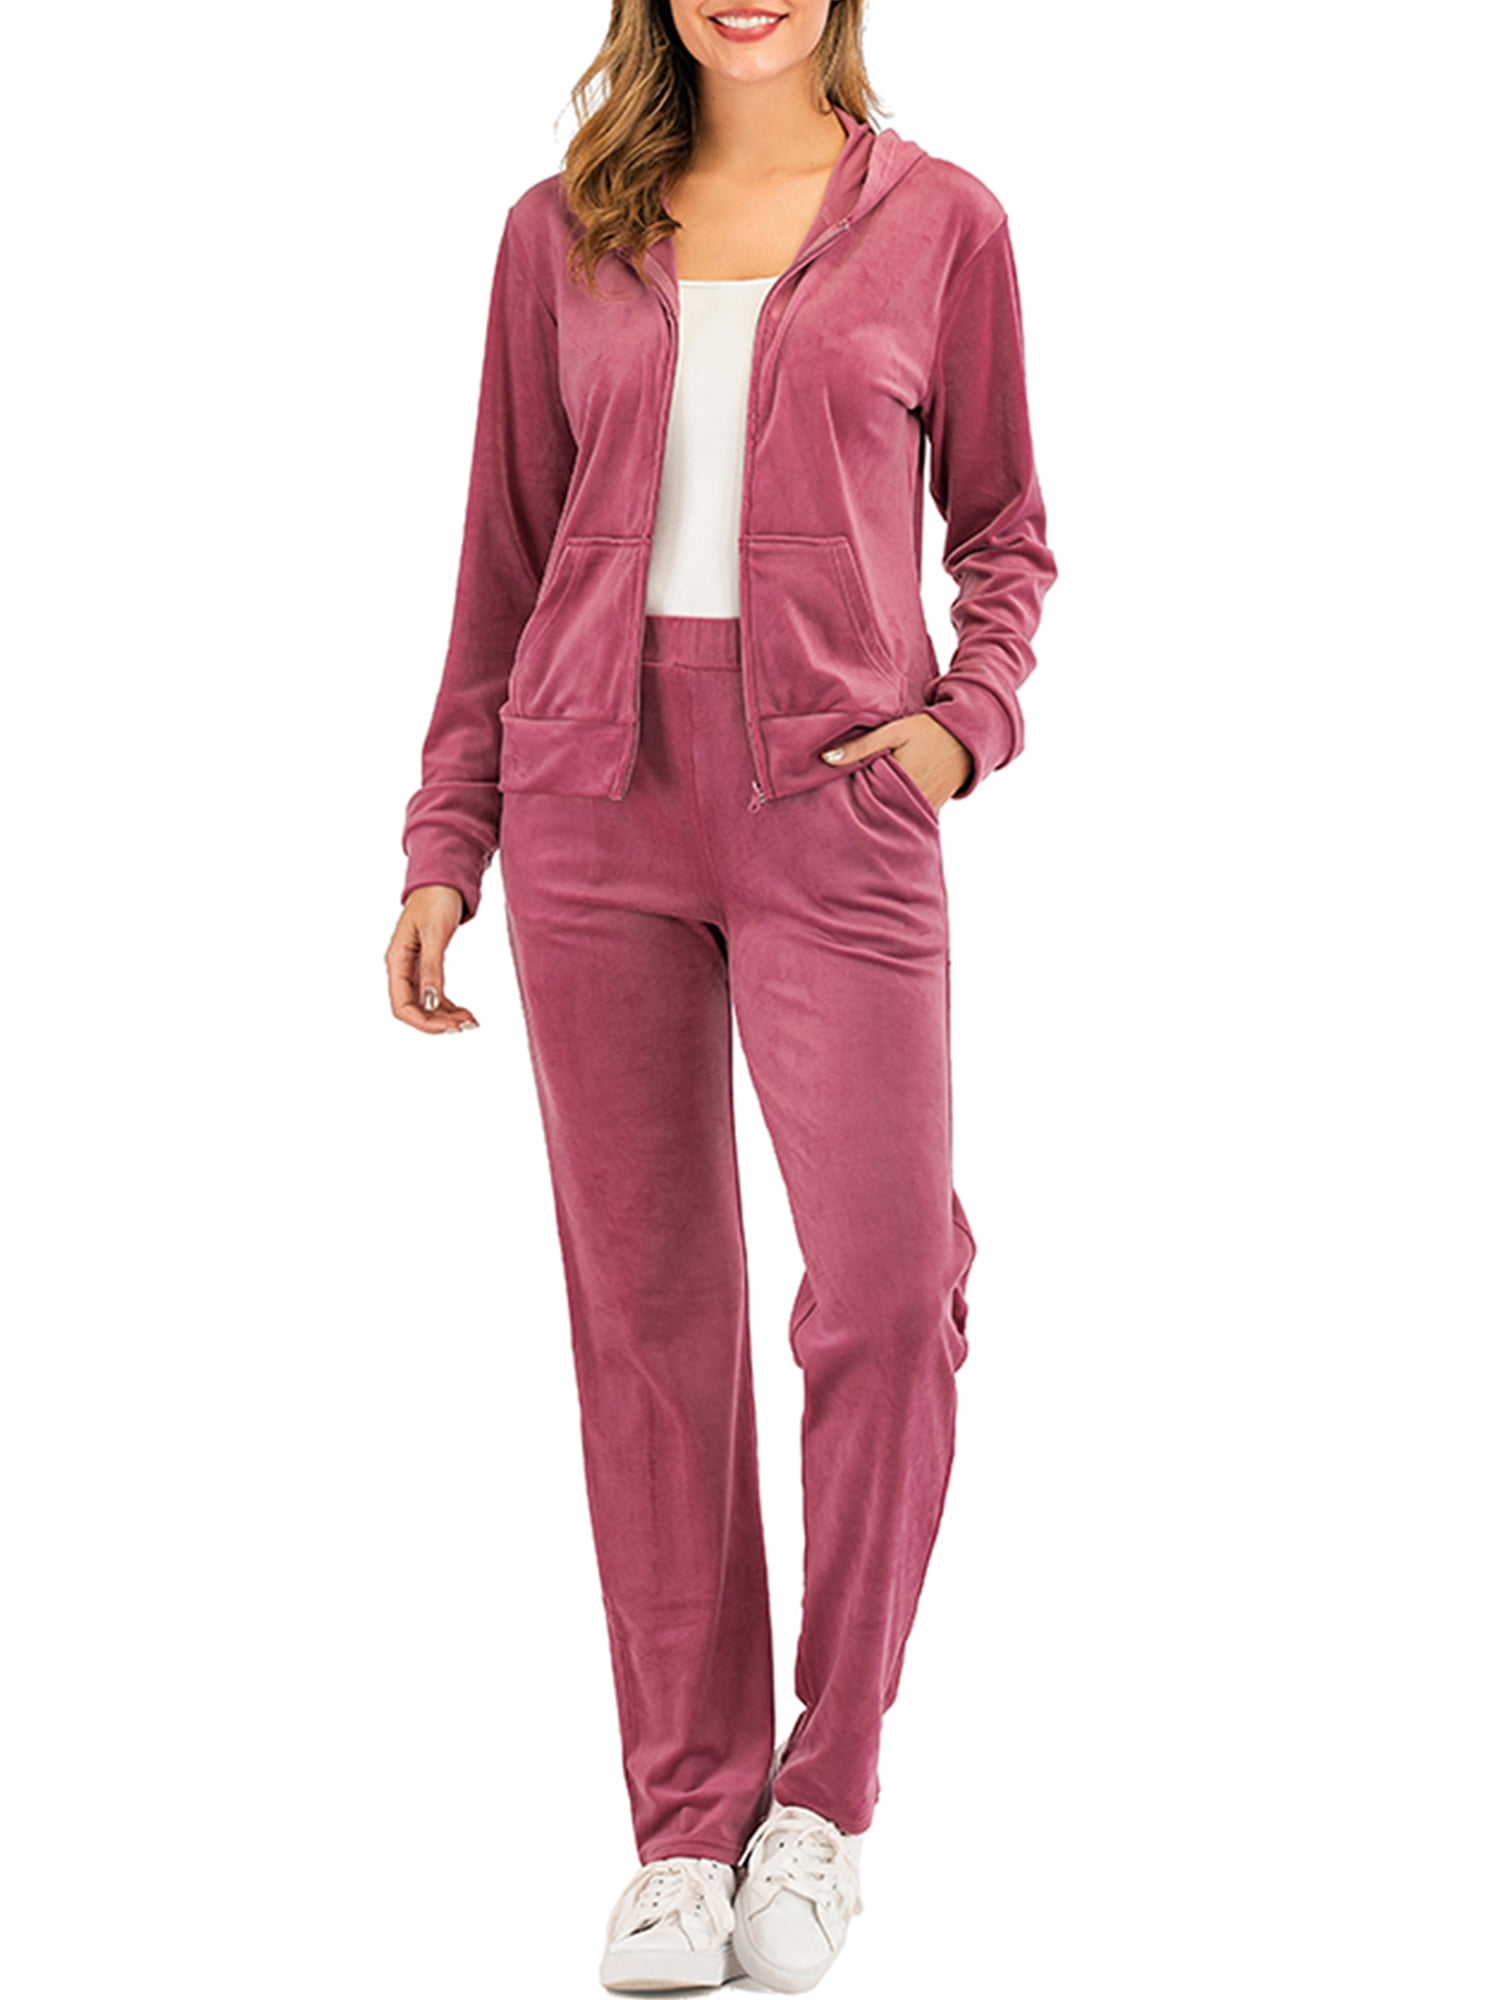 Akalnny Women Casual Basic Velour Sweatsuit Set Zip Up Hoodies and Pants Sports Suits Tracksuits